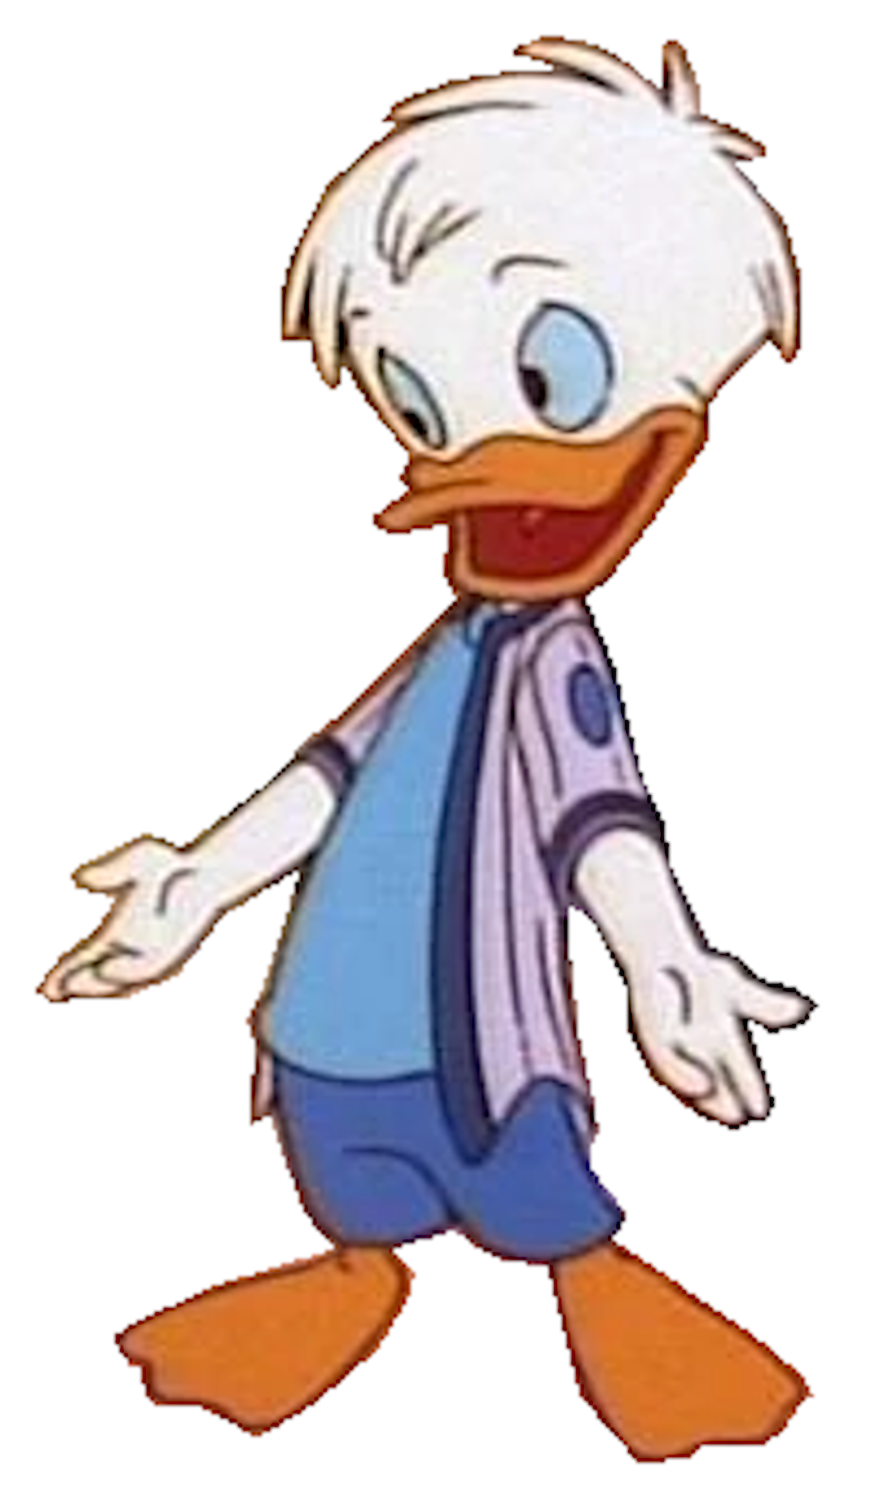 Dewey From Quack Pack By Kaylor2013 On Deviantart